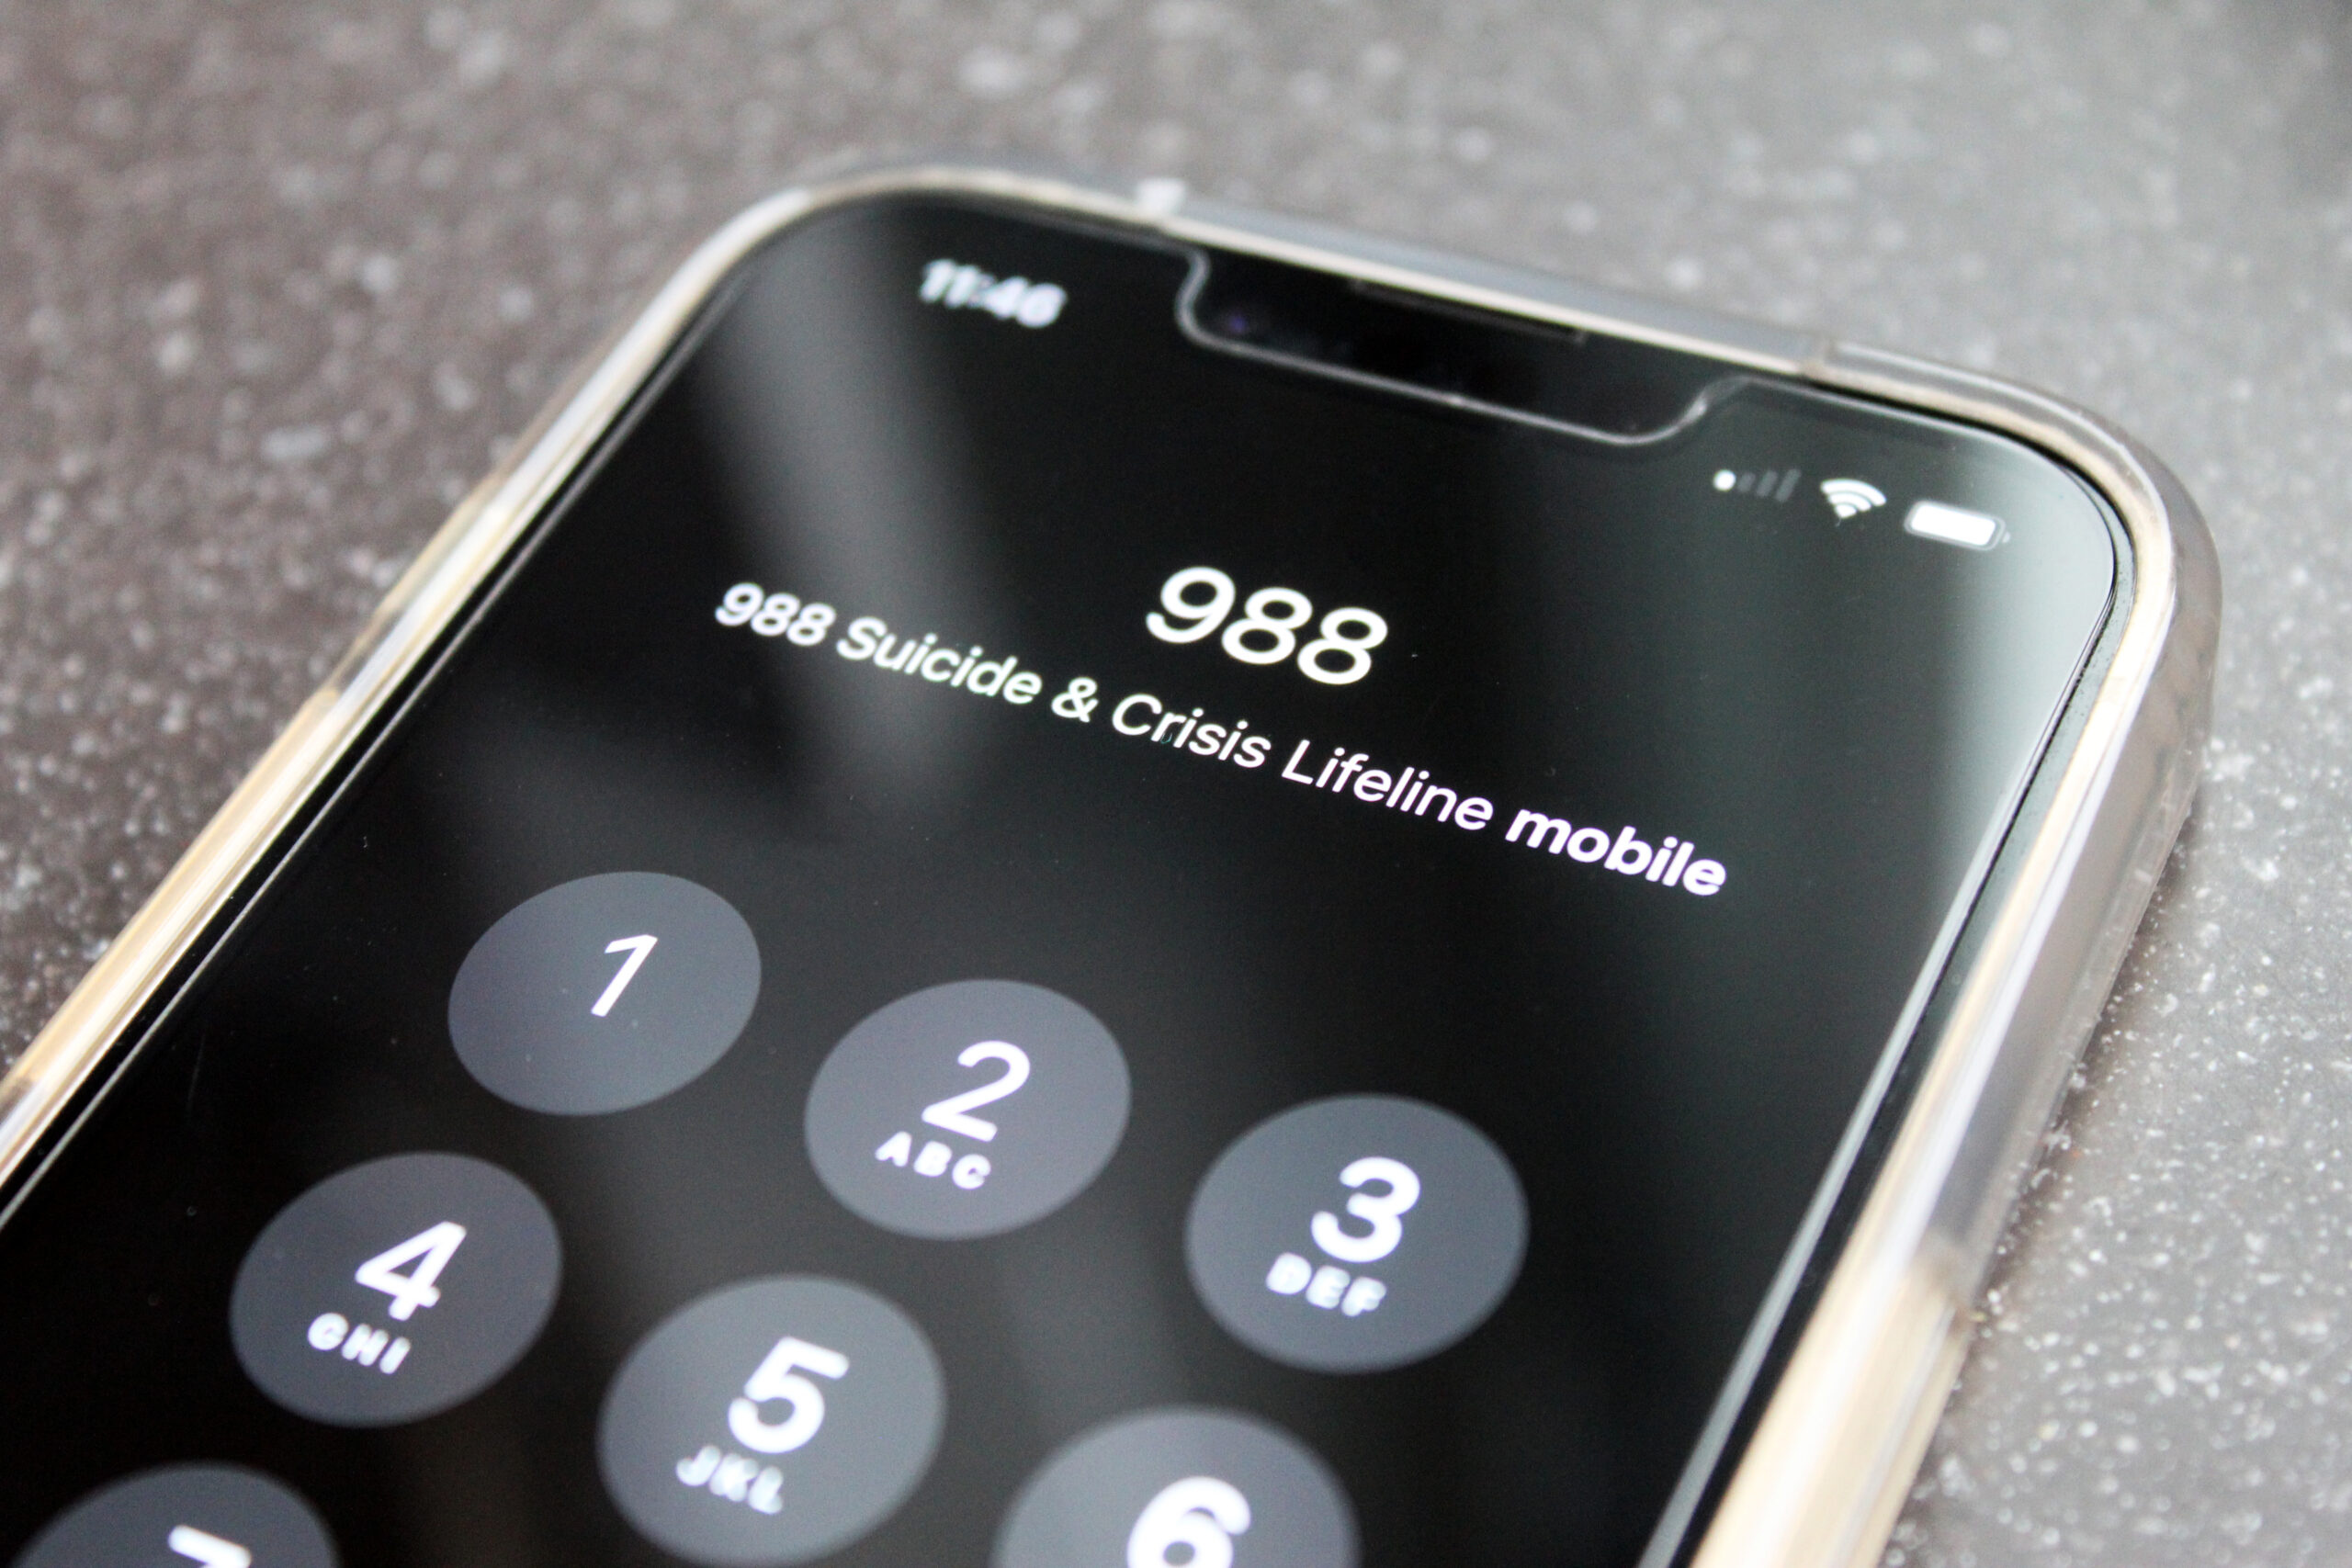 A phone dials 988 to access the national lifeline